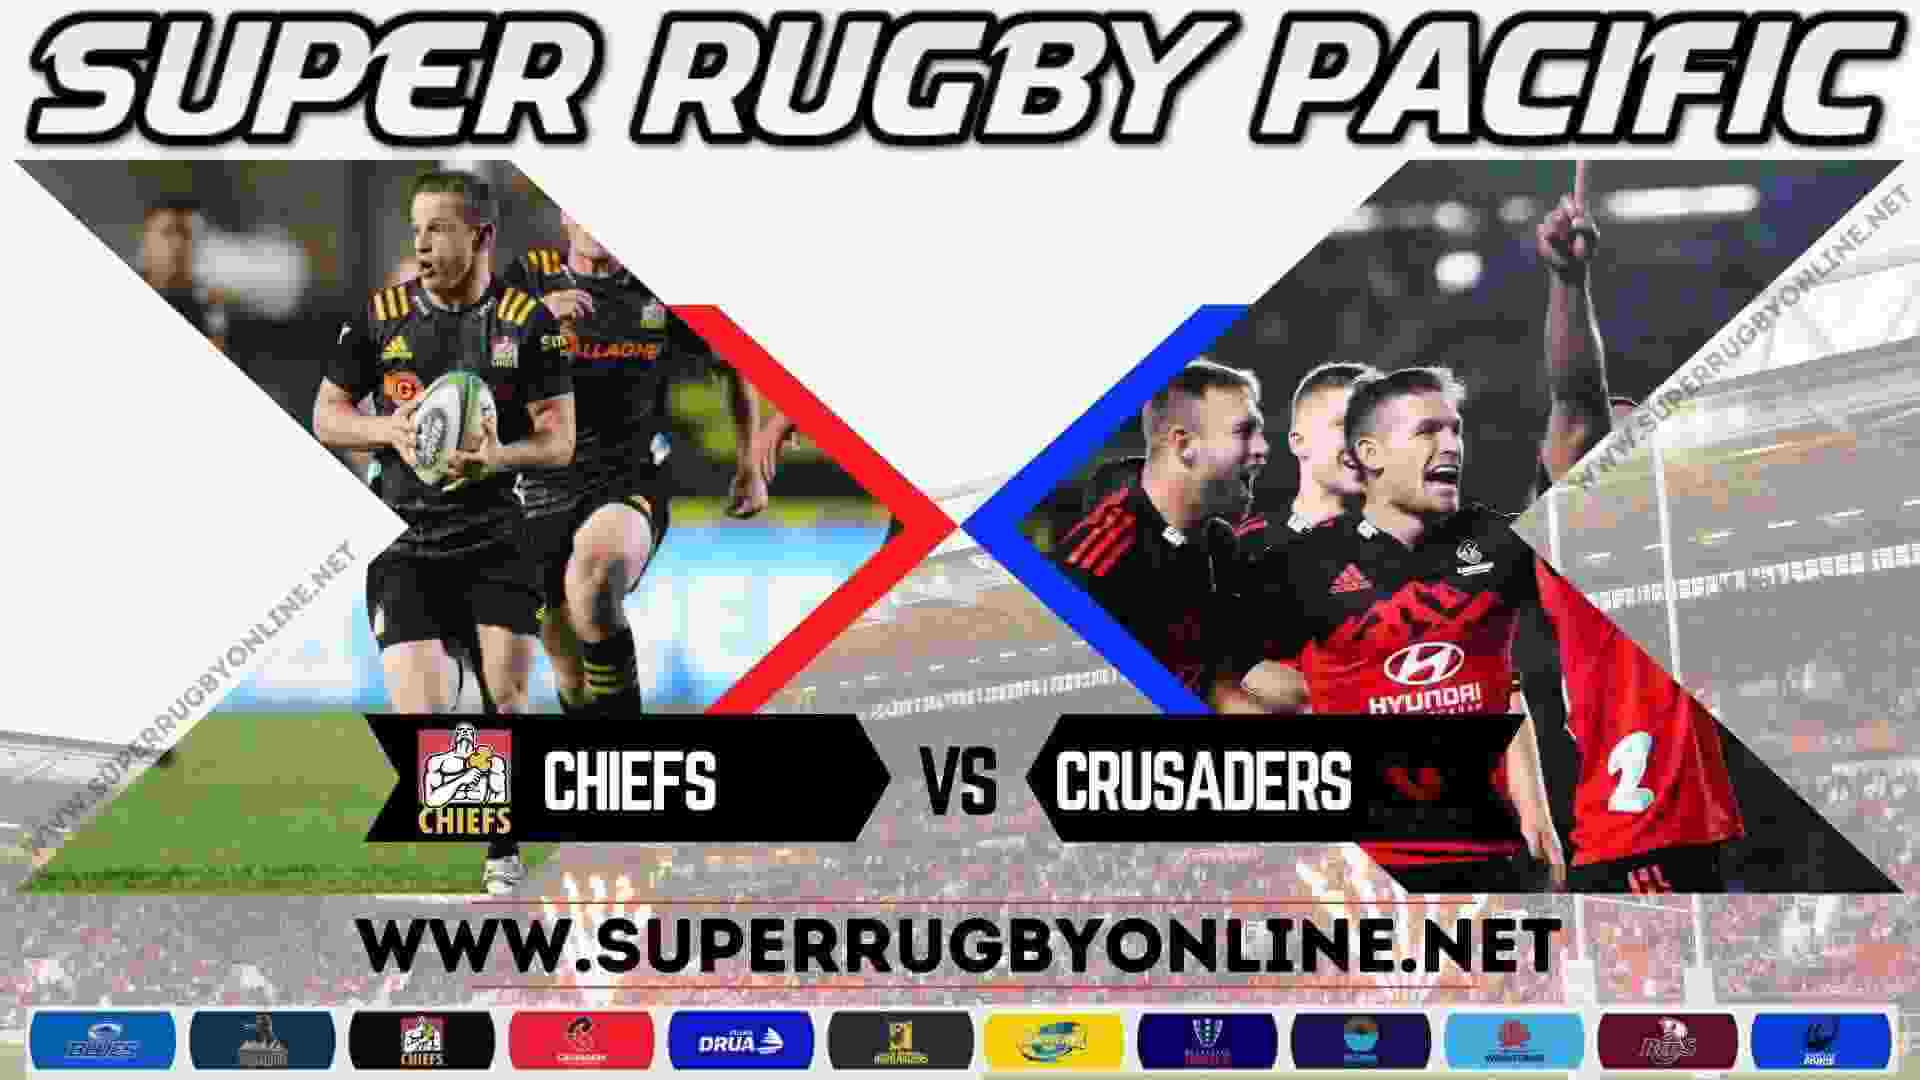 crusaders-vs-chiefs-super-rugby-live-stream